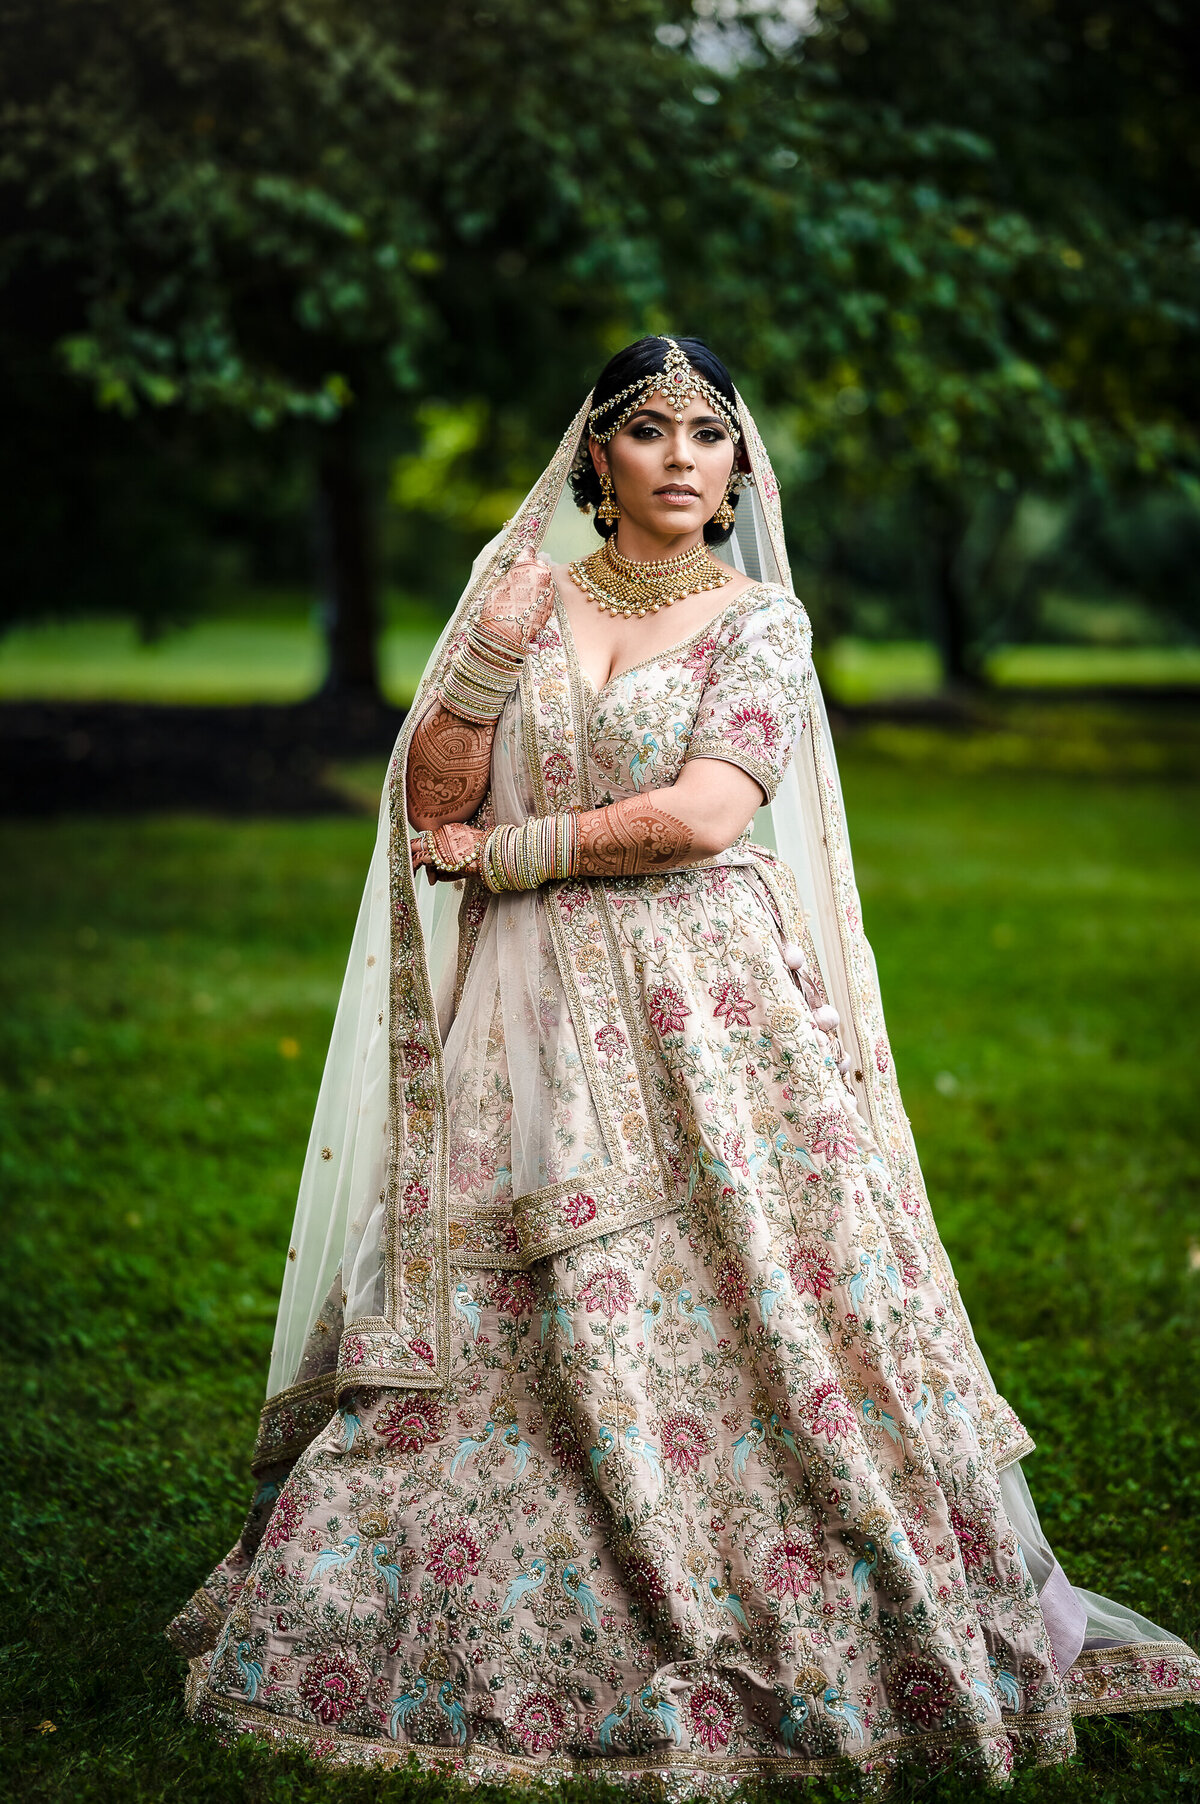 Ishan Fotografi is a NJ photographer specializing in vibrant fusion weddings.